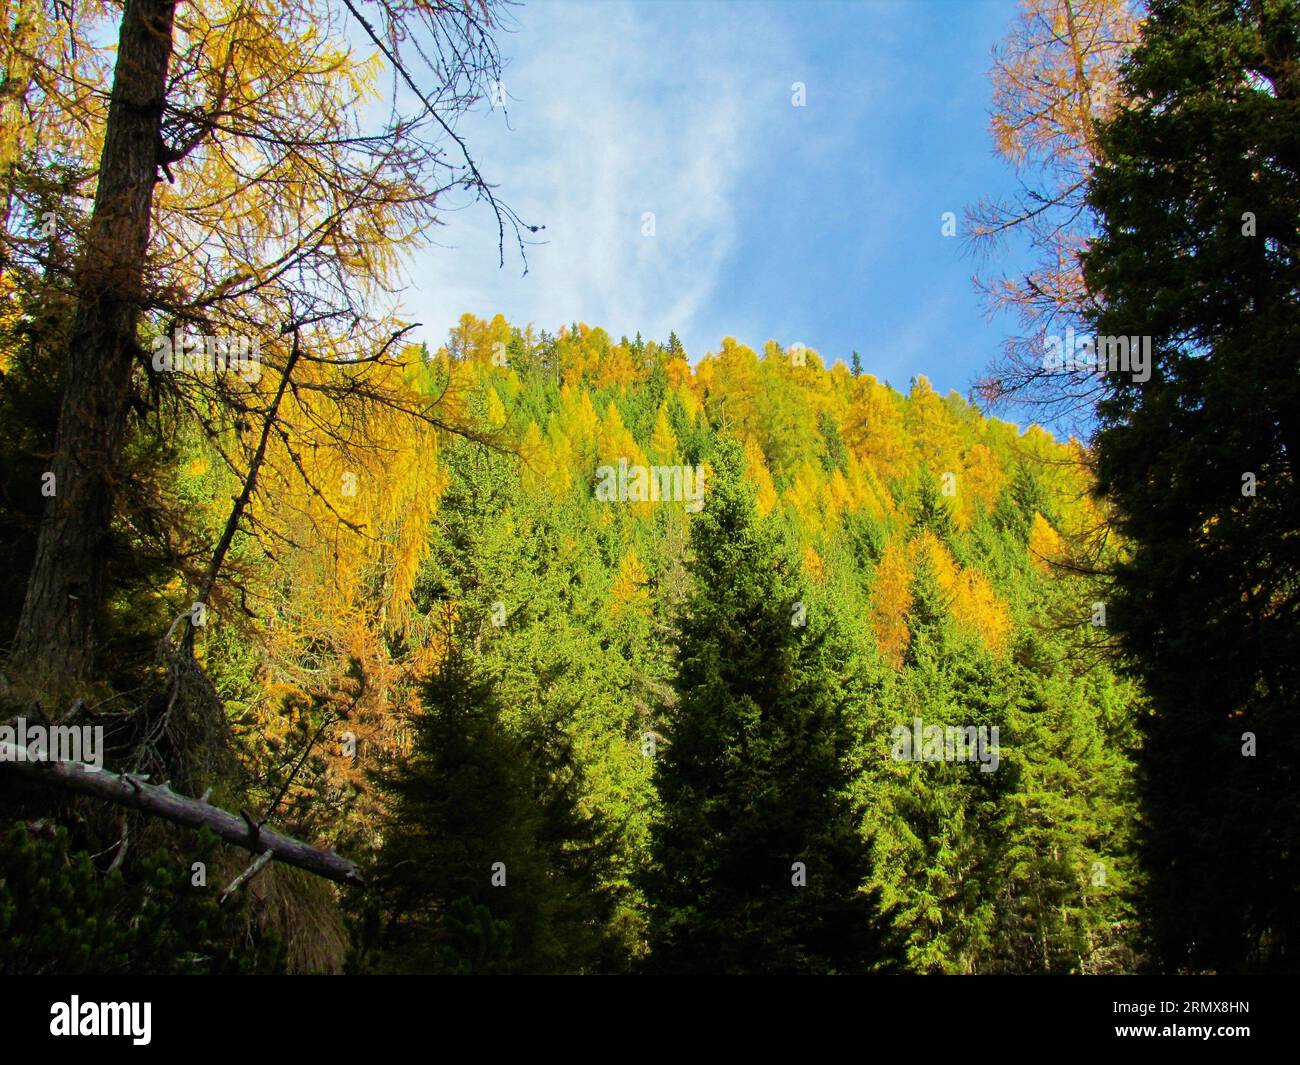 Forest of spruce (Picea abies) and larch (Larix decidua) in autumn with the larch in gold yellow colors in Slovenia Stock Photo